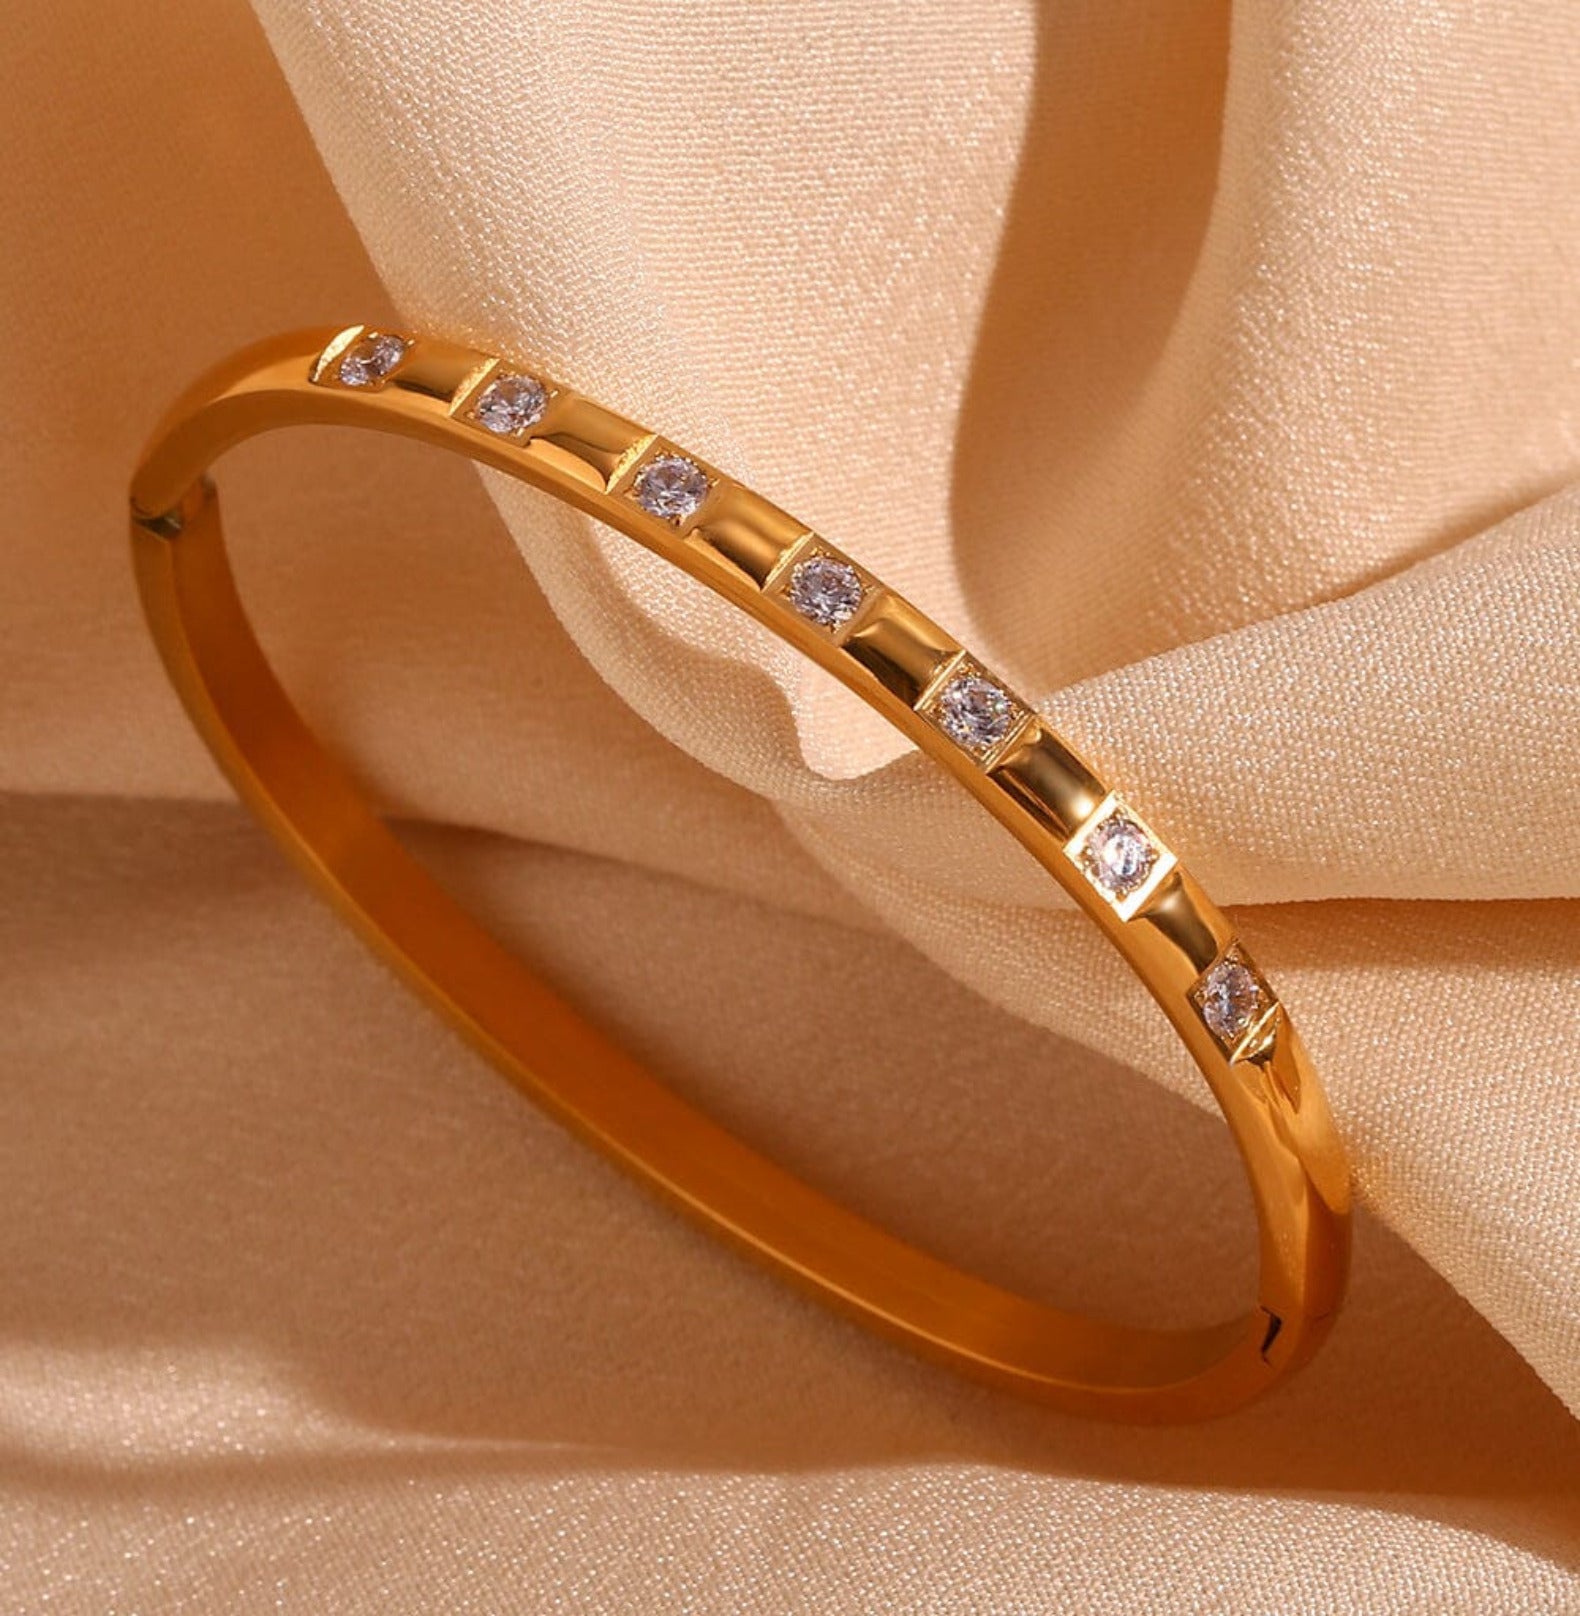 RECTANGLE ZIRCON BANGLE braclet Yubama Jewelry Online Store - The Elegant Designs of Gold and Silver ! 